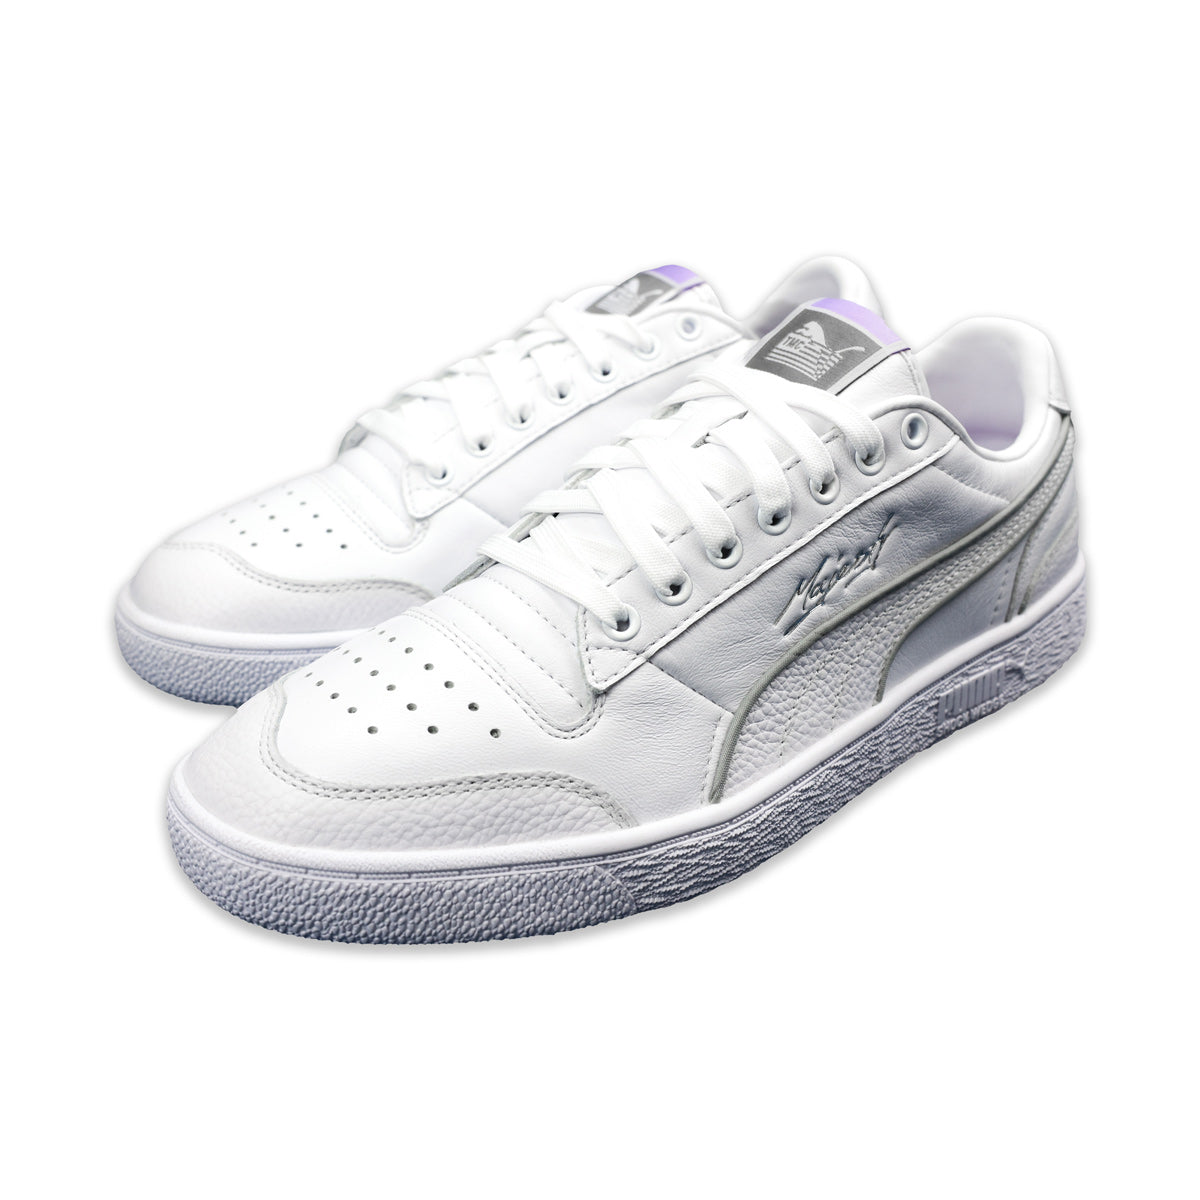 Puma x TMC Hussle Way (People’s Champ) Shoes - White/Purple - Lateral Side